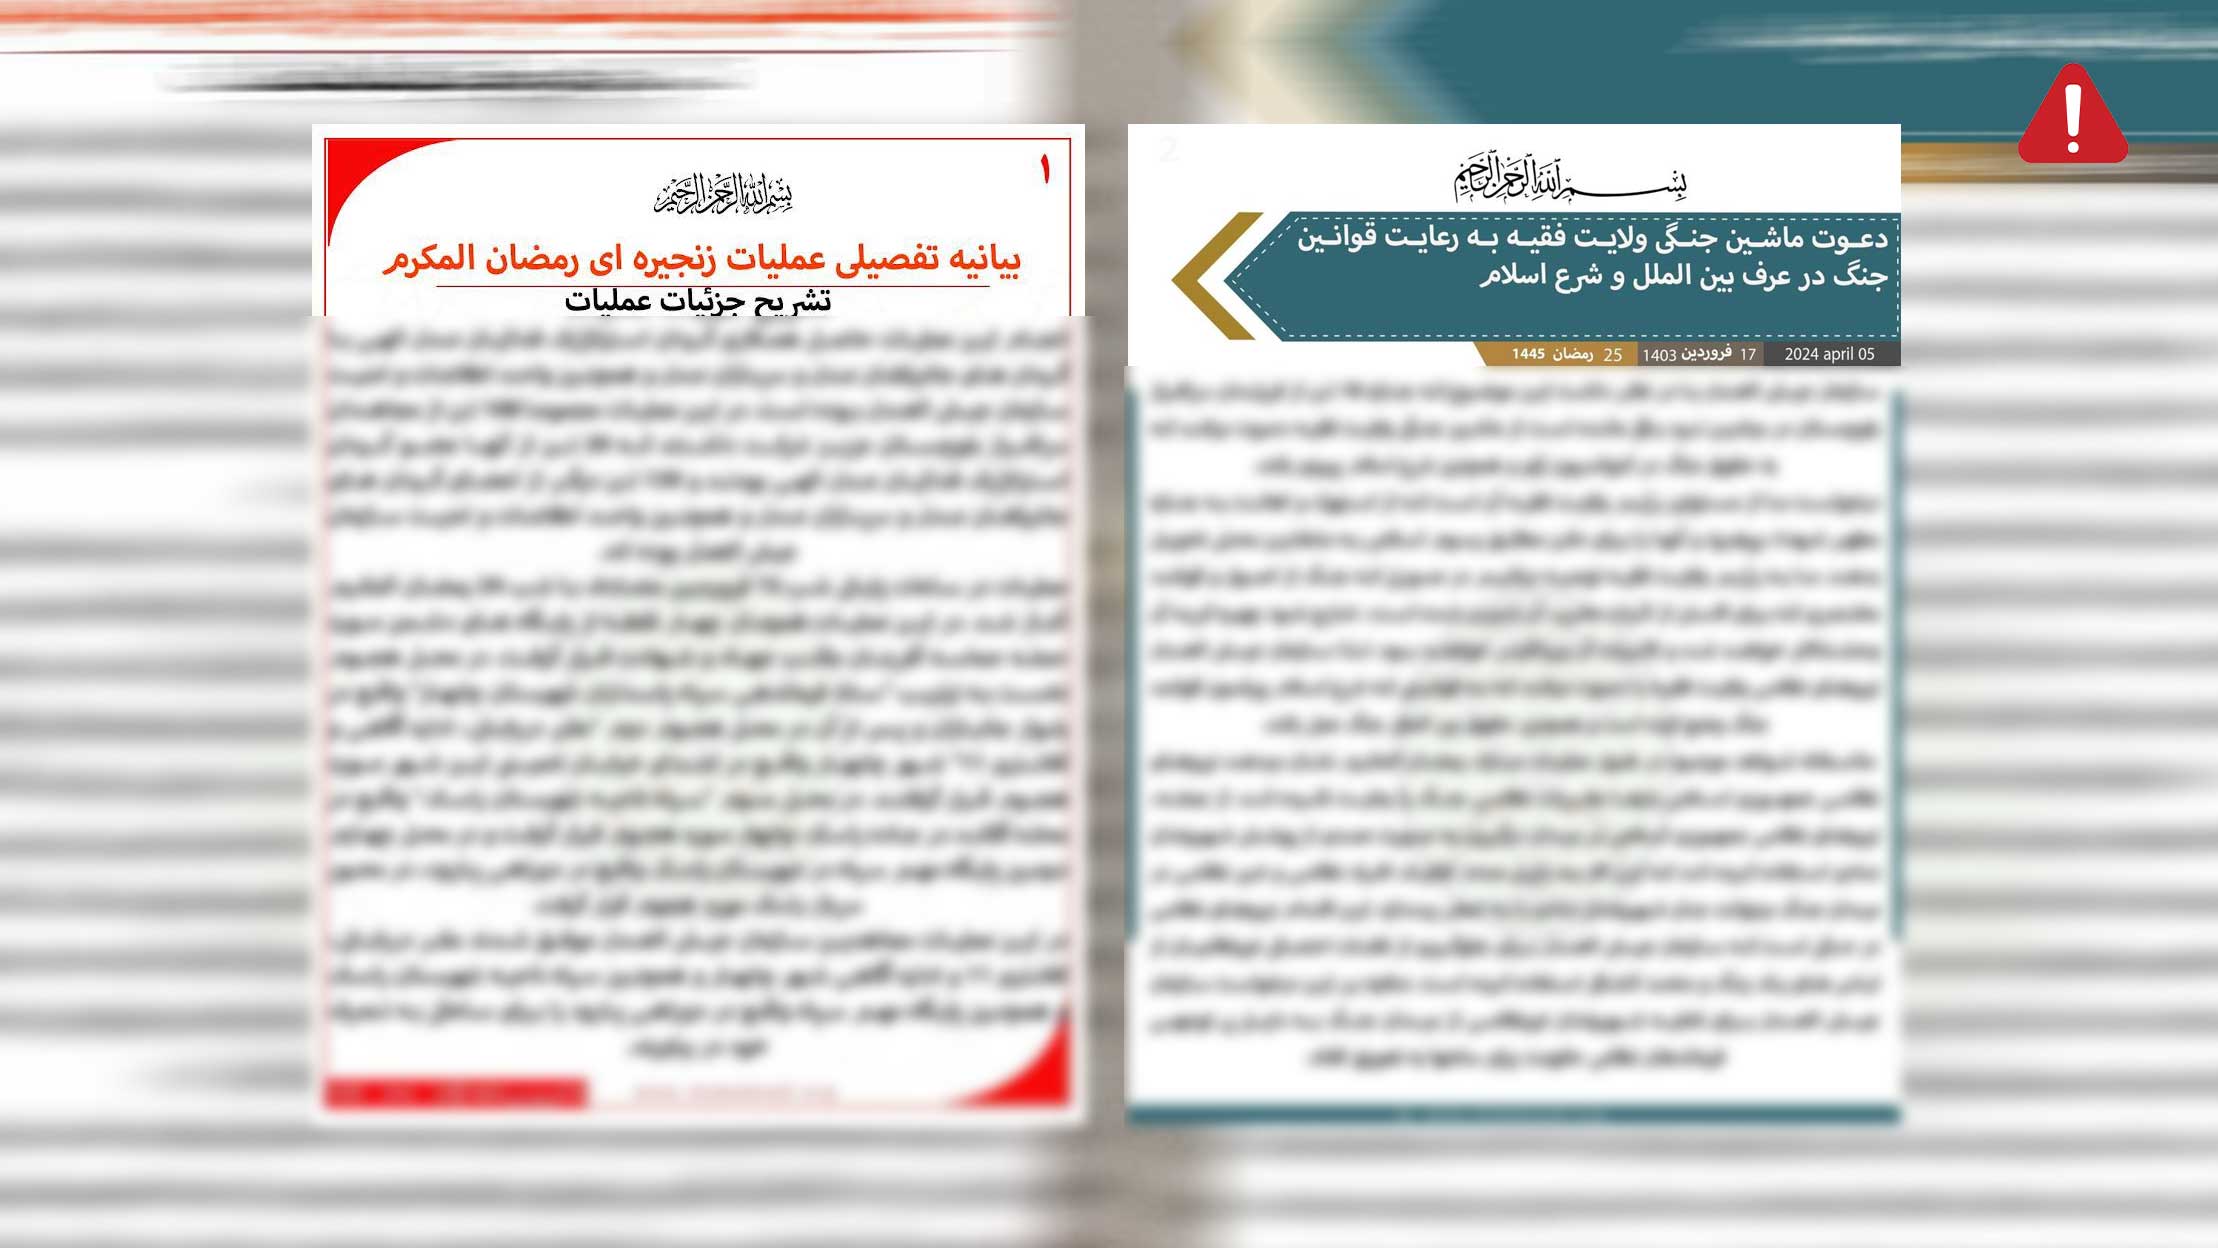 TKD MONITORING: Jaish ul Adl Releases Detailed Statements on its April 4 Operations and Threaten New Attacks